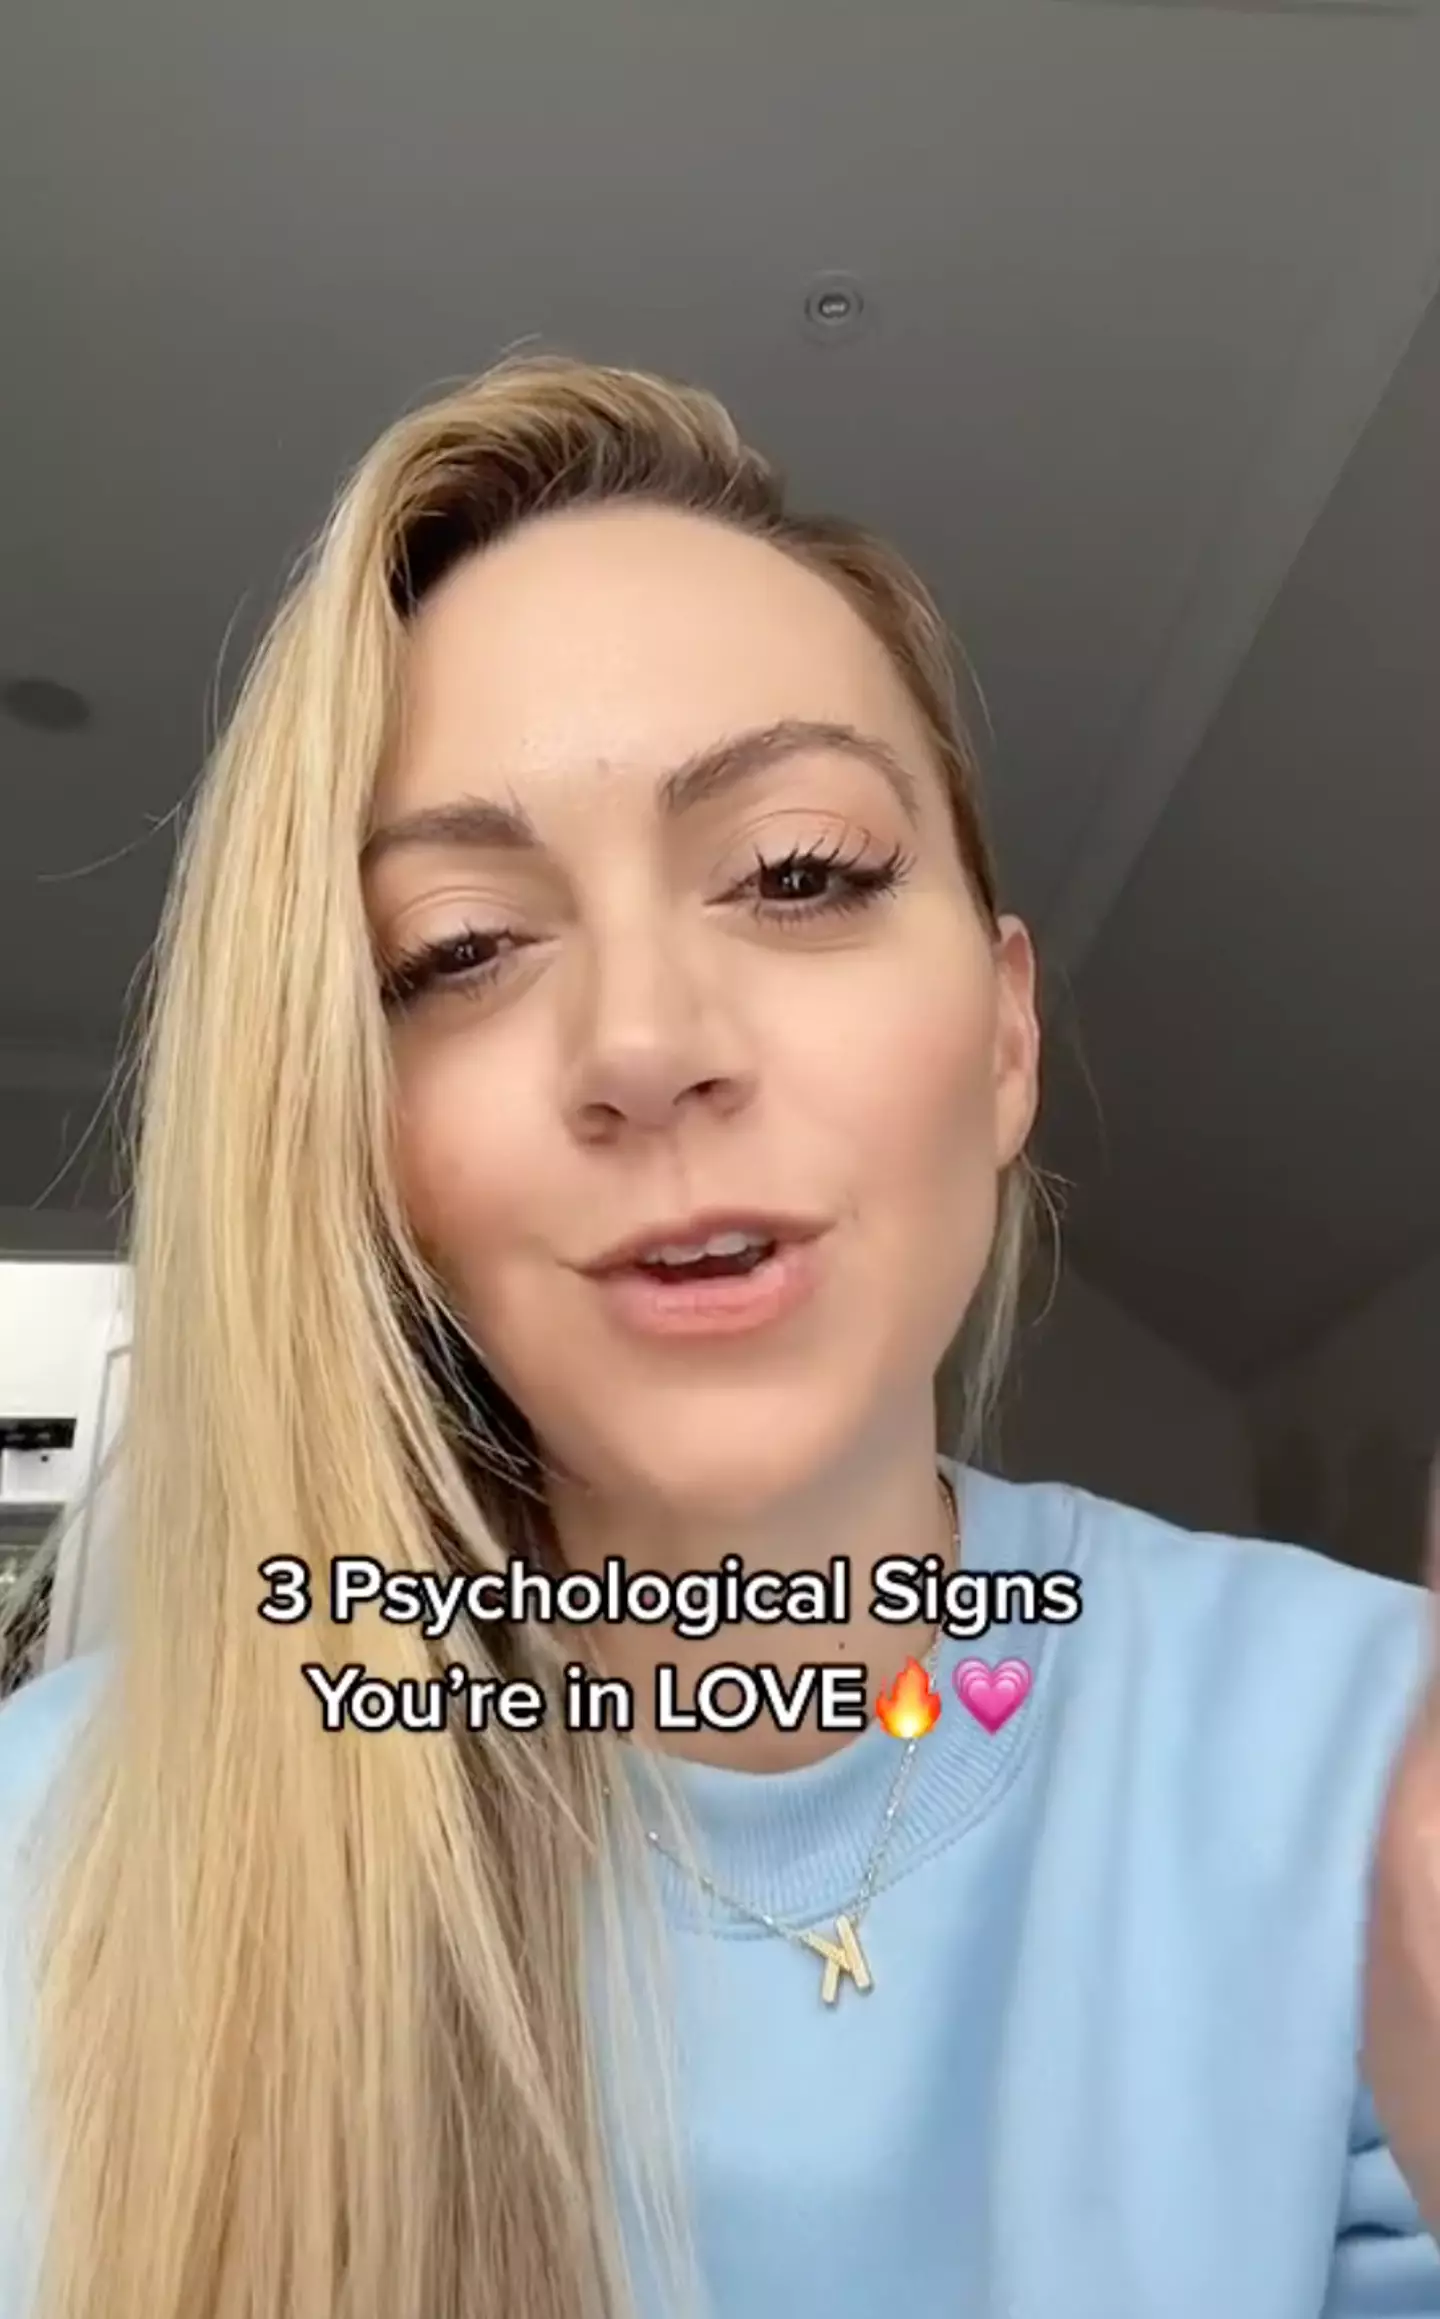 Kimberly Moffit shared the three psychological signs that you're in love on TikTok.